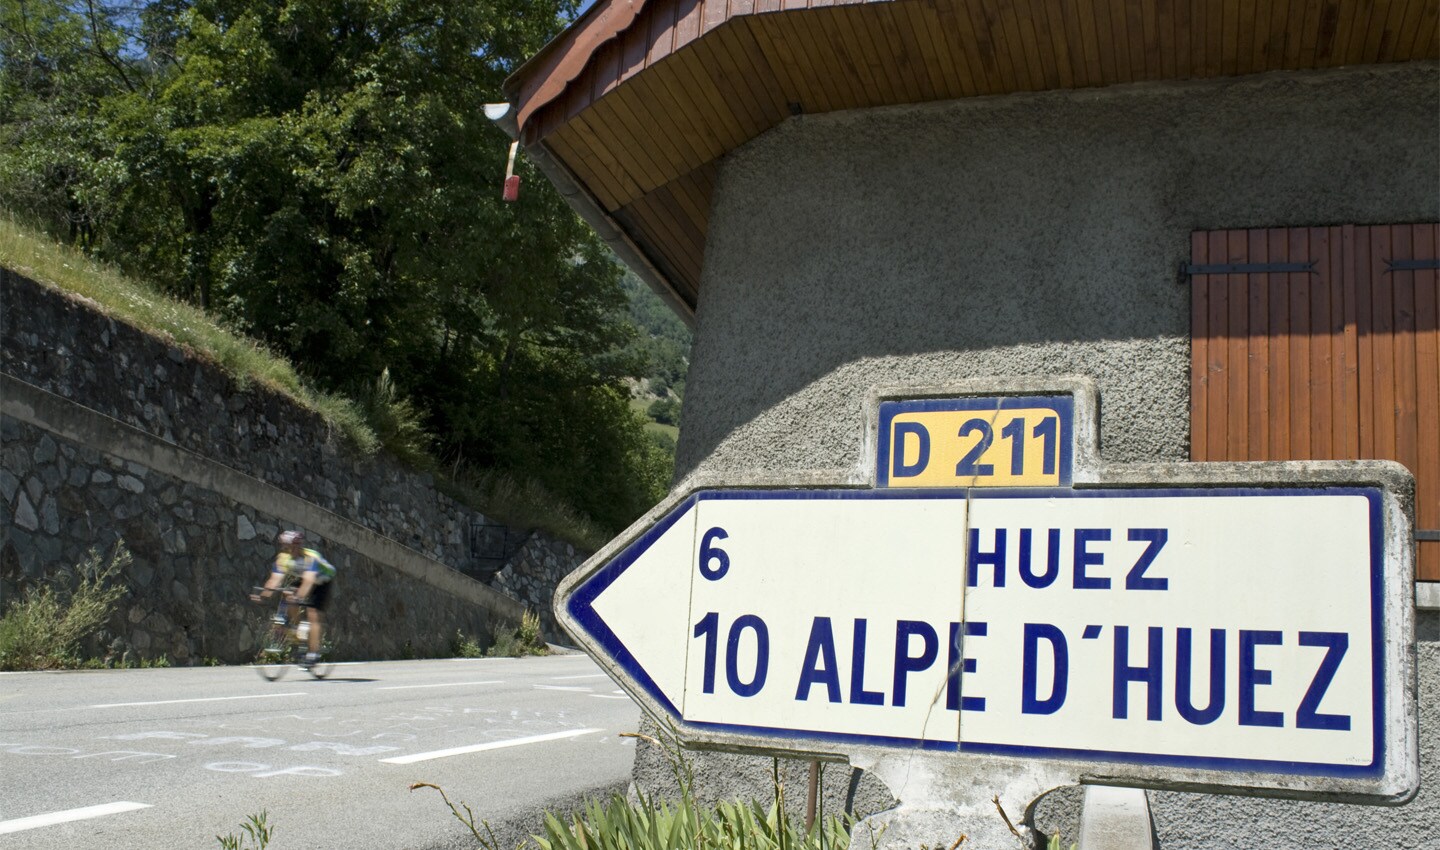 The Alpe d’Huez was the first mountaintop finish in Tour de France history.